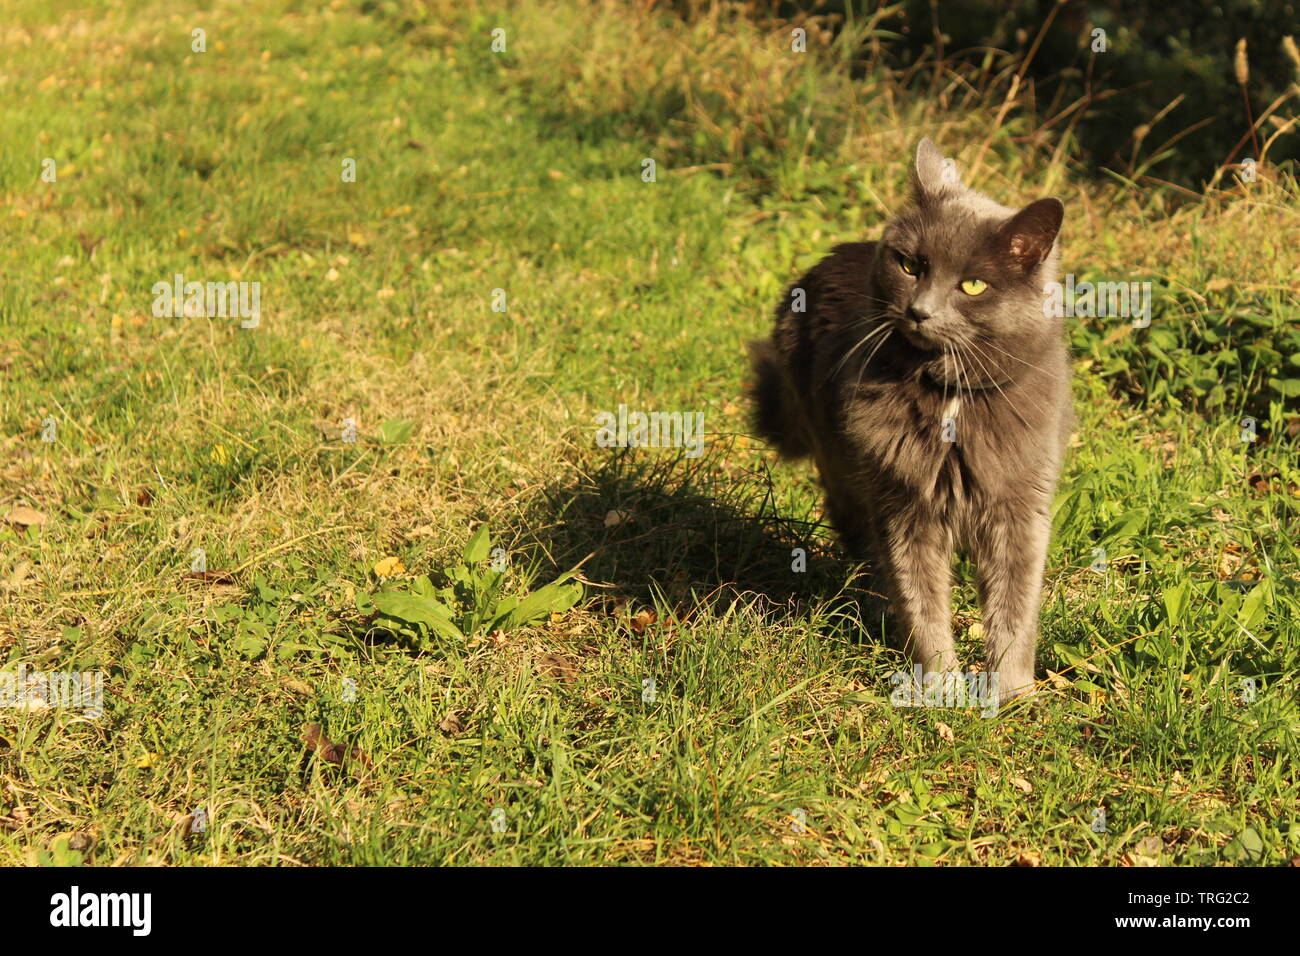 Cute kitty walking in the grass Stock Photo